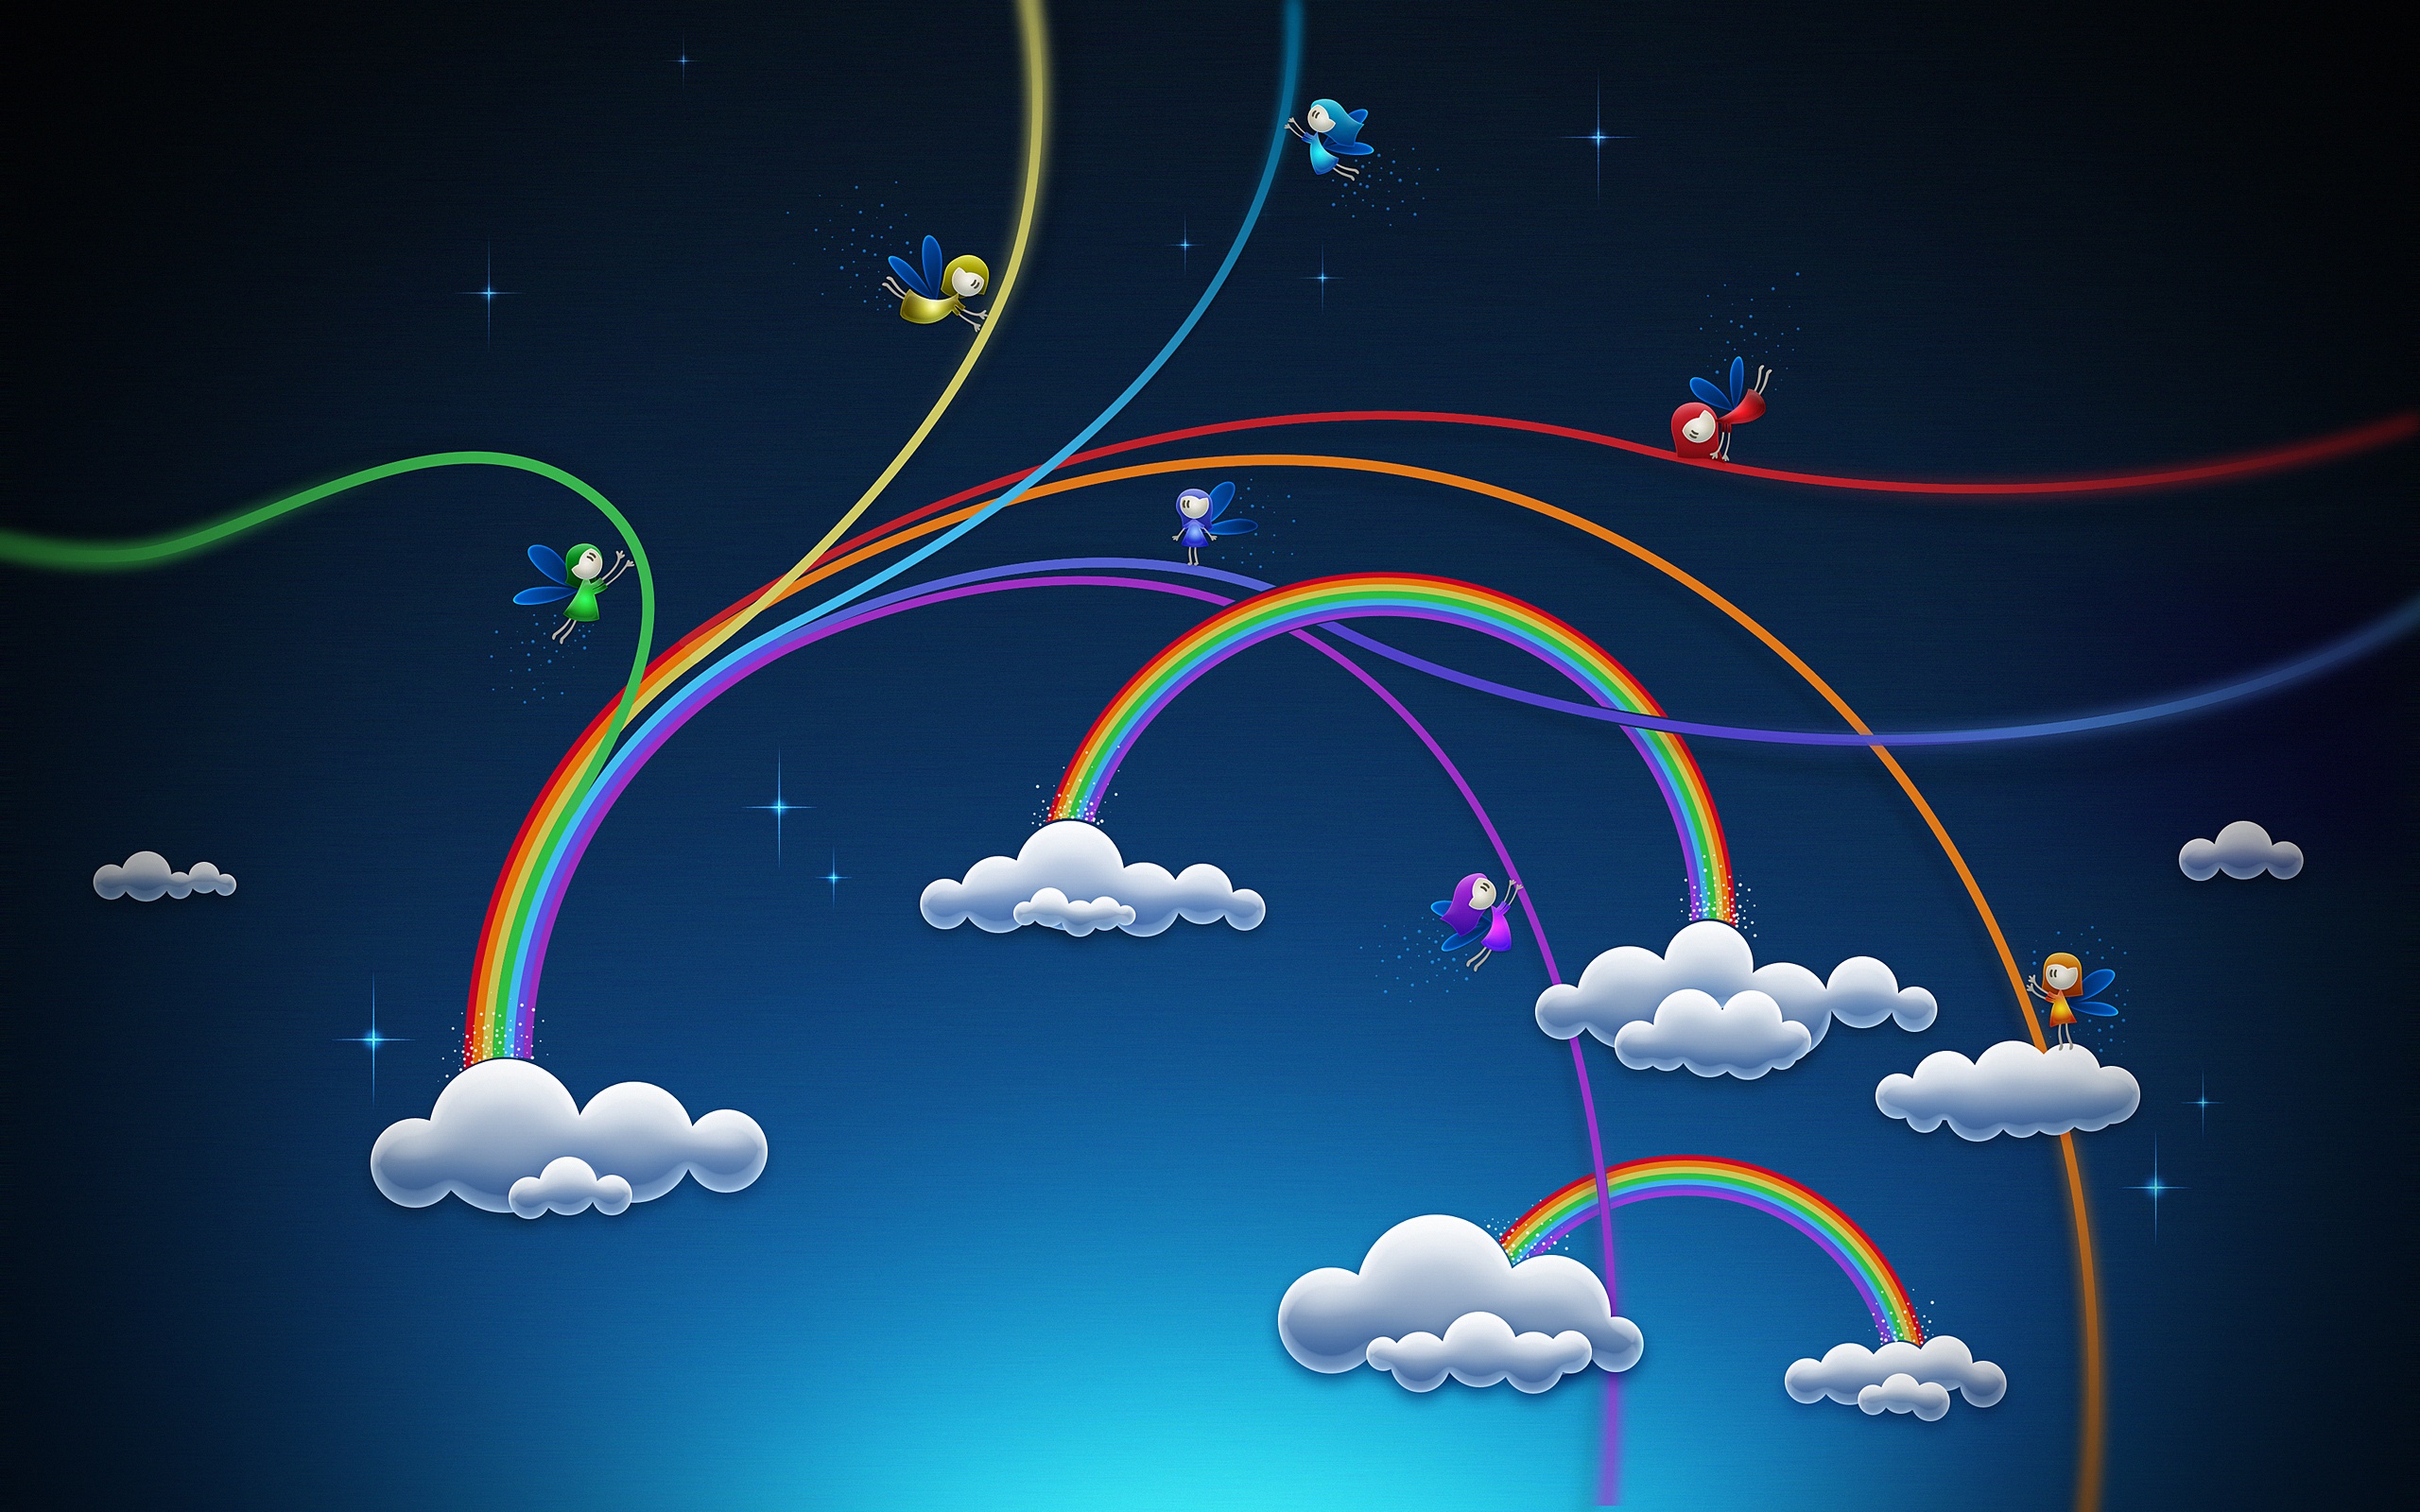 Rainbows Wallpaper in jpg format for free download